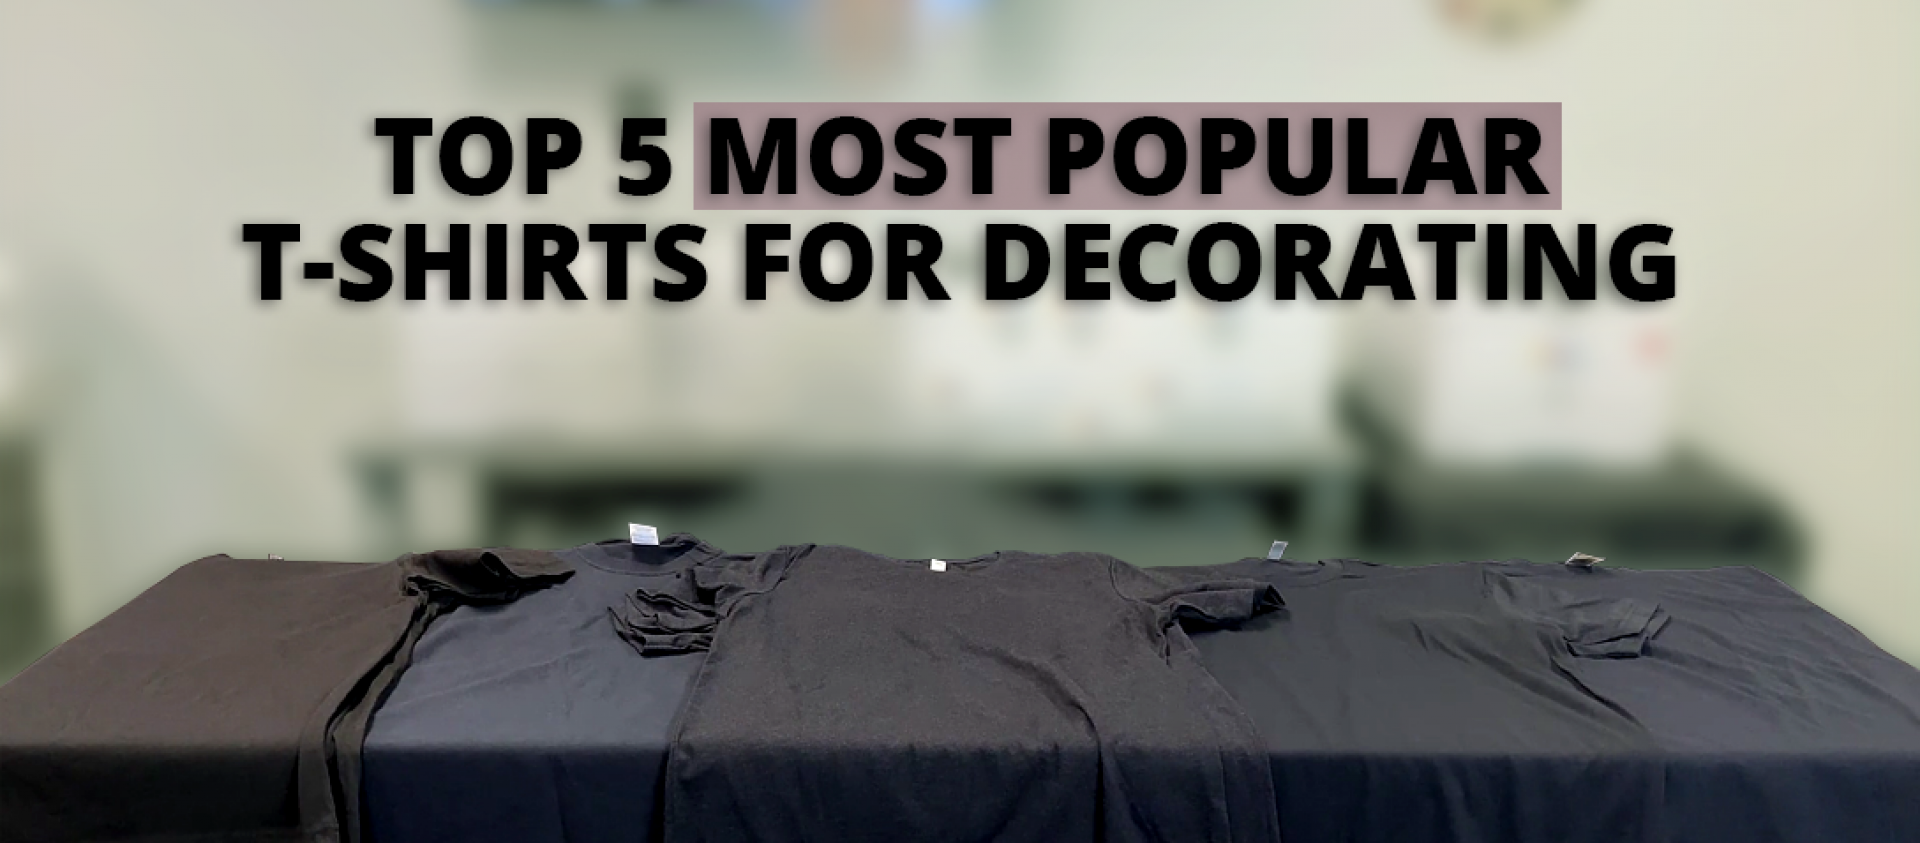 What-Are-The-Most-Popular-Shirts-for-Decorating-article